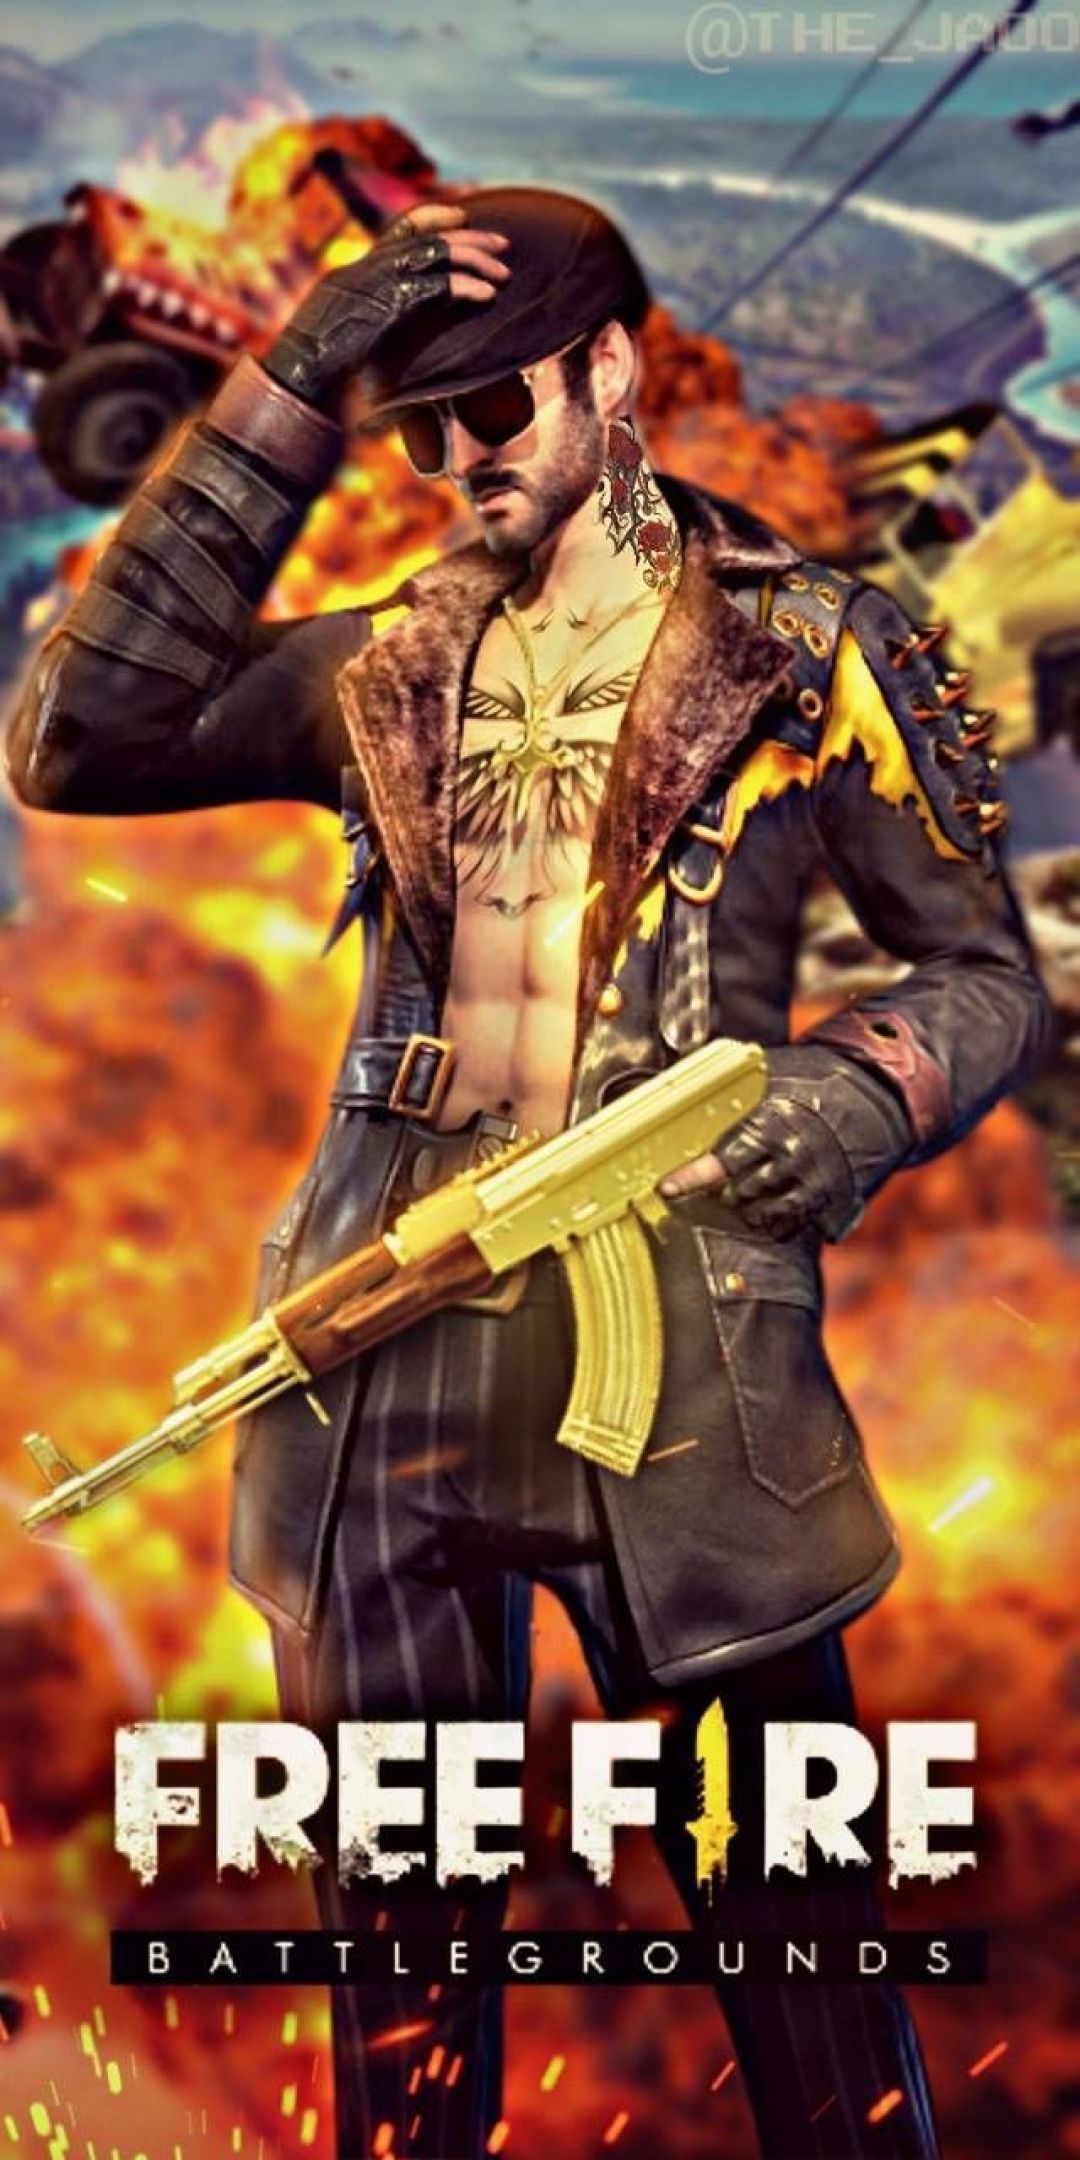 Free Fire Image, HD Photo (1080p), Wallpaper (Android IPhone) (2021)